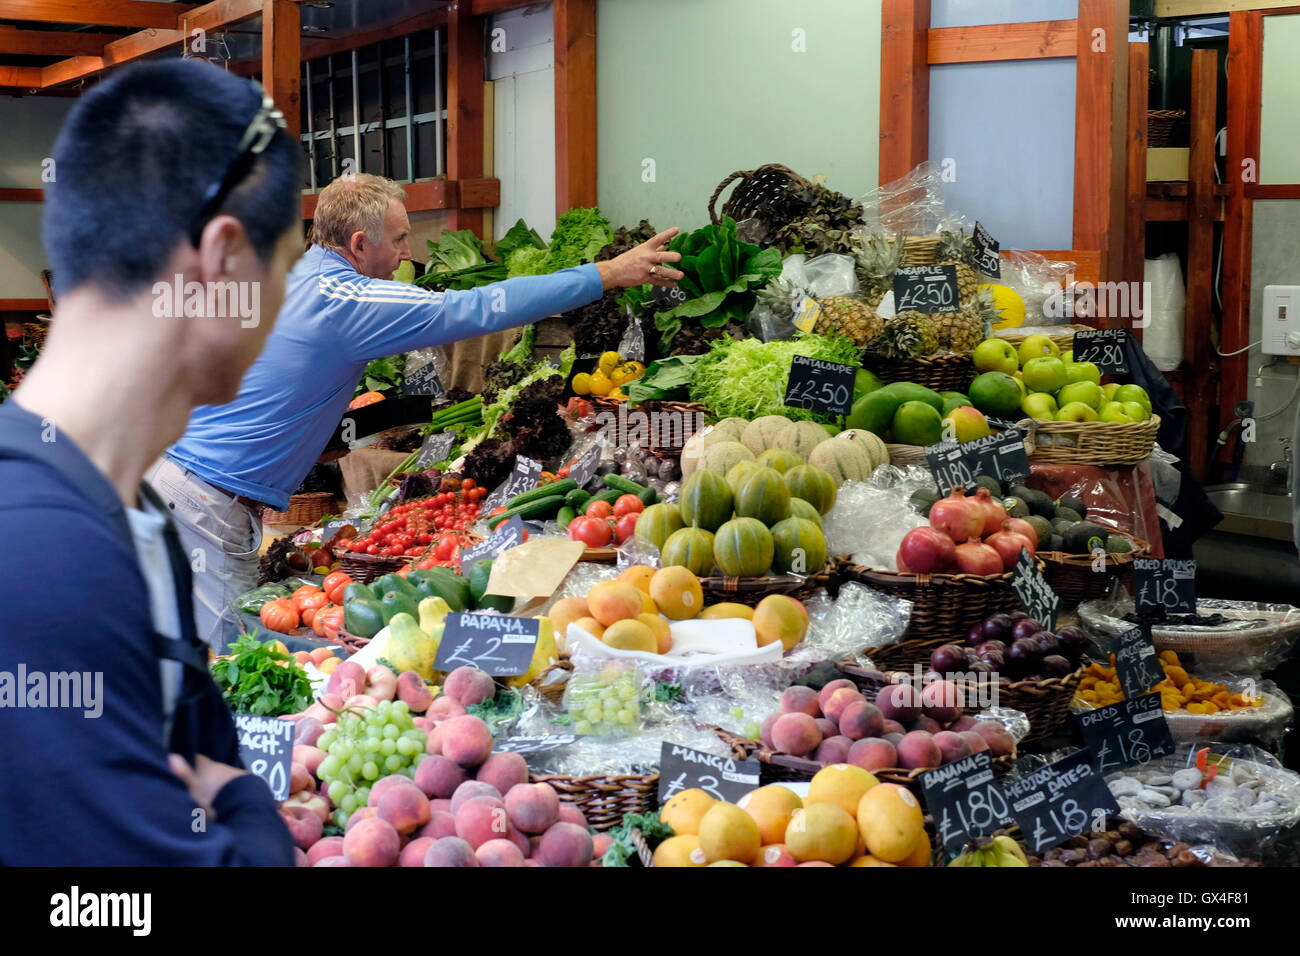 A man buying vegetables from a fruit and veg stall in Borough market Stock Photo